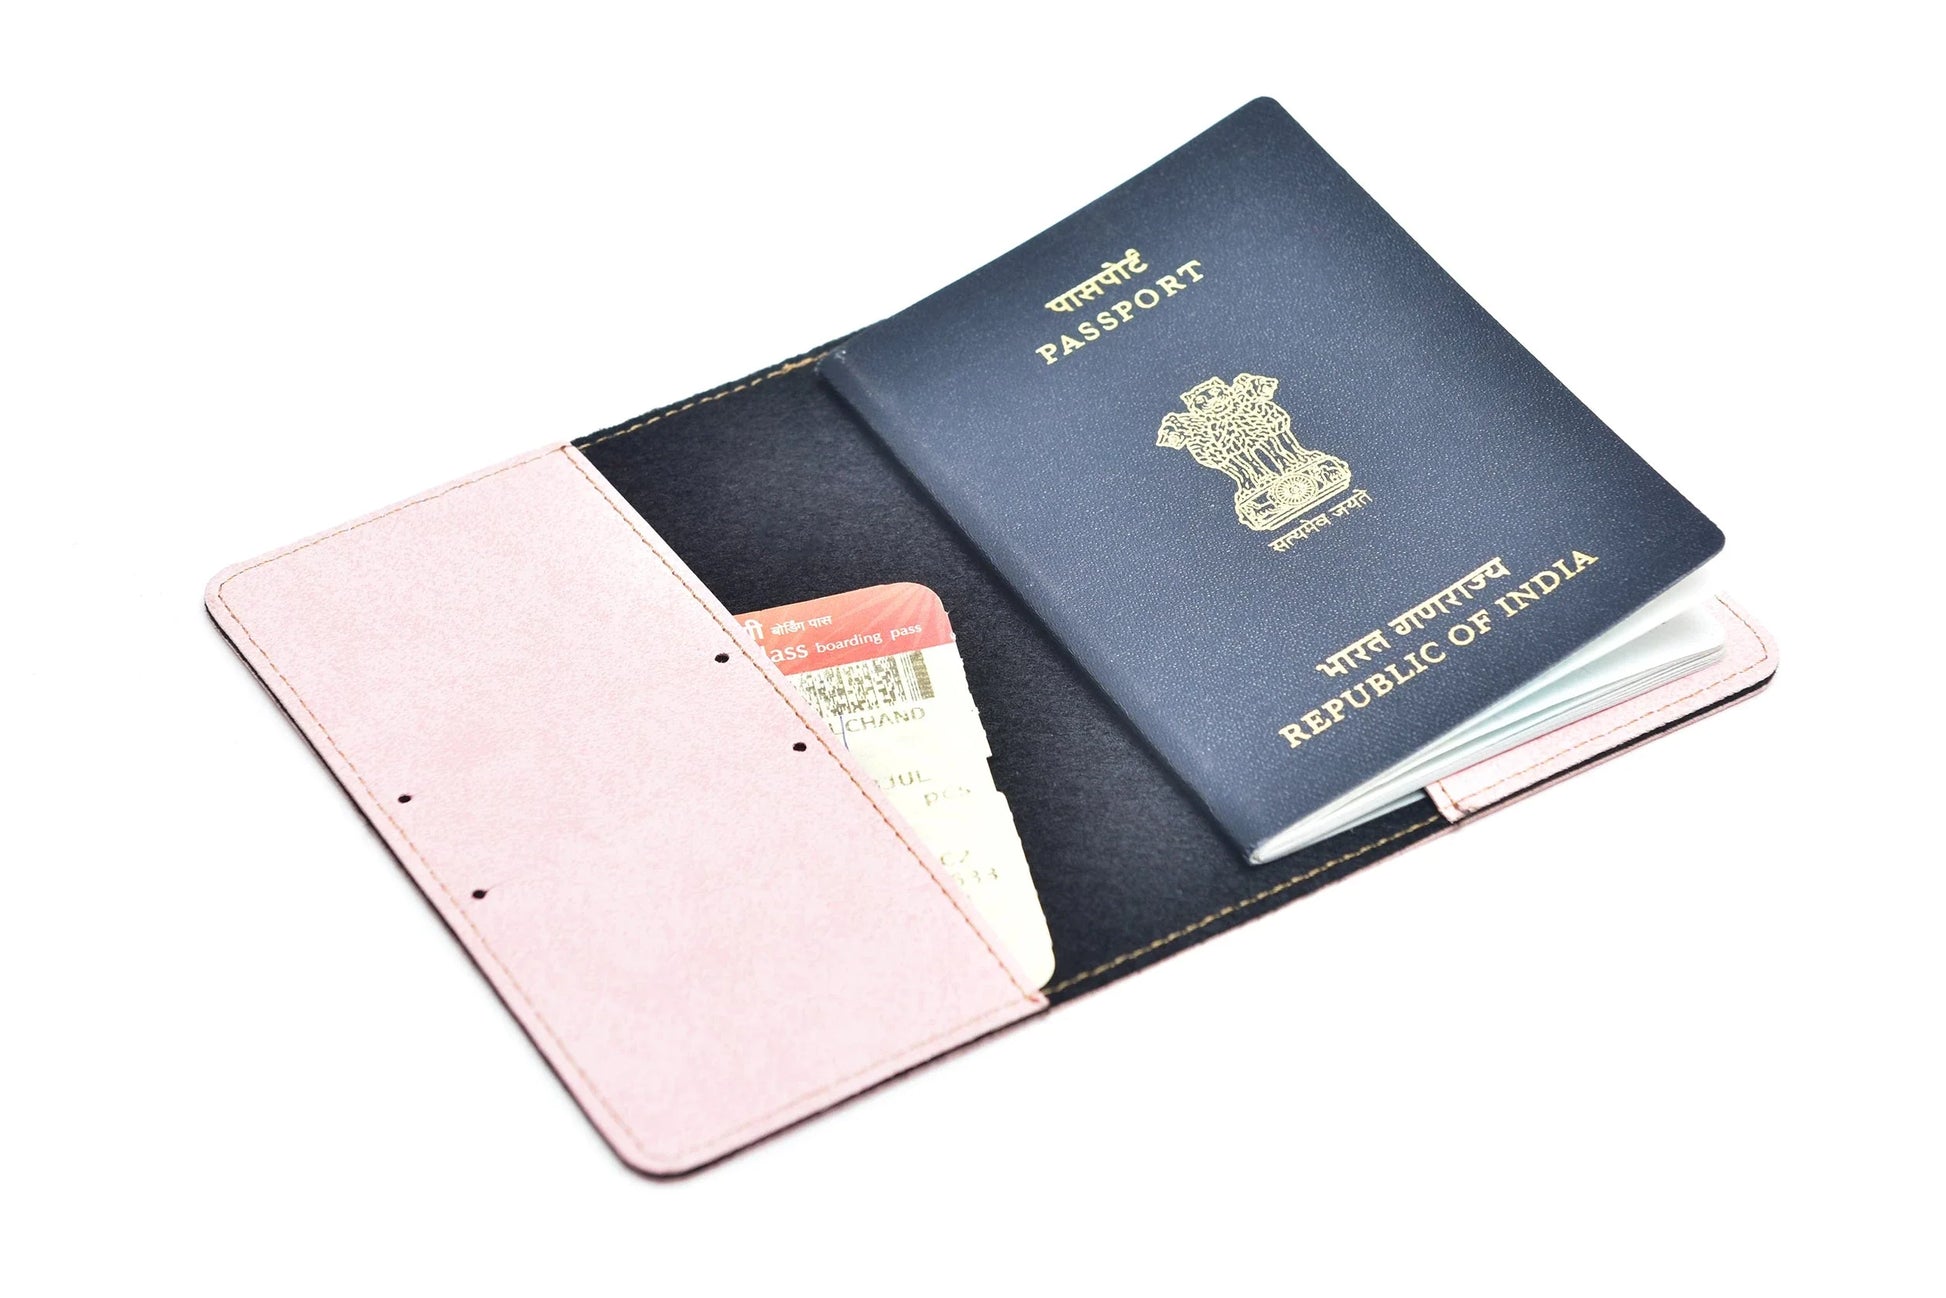 Inside or open view of pink passport cover